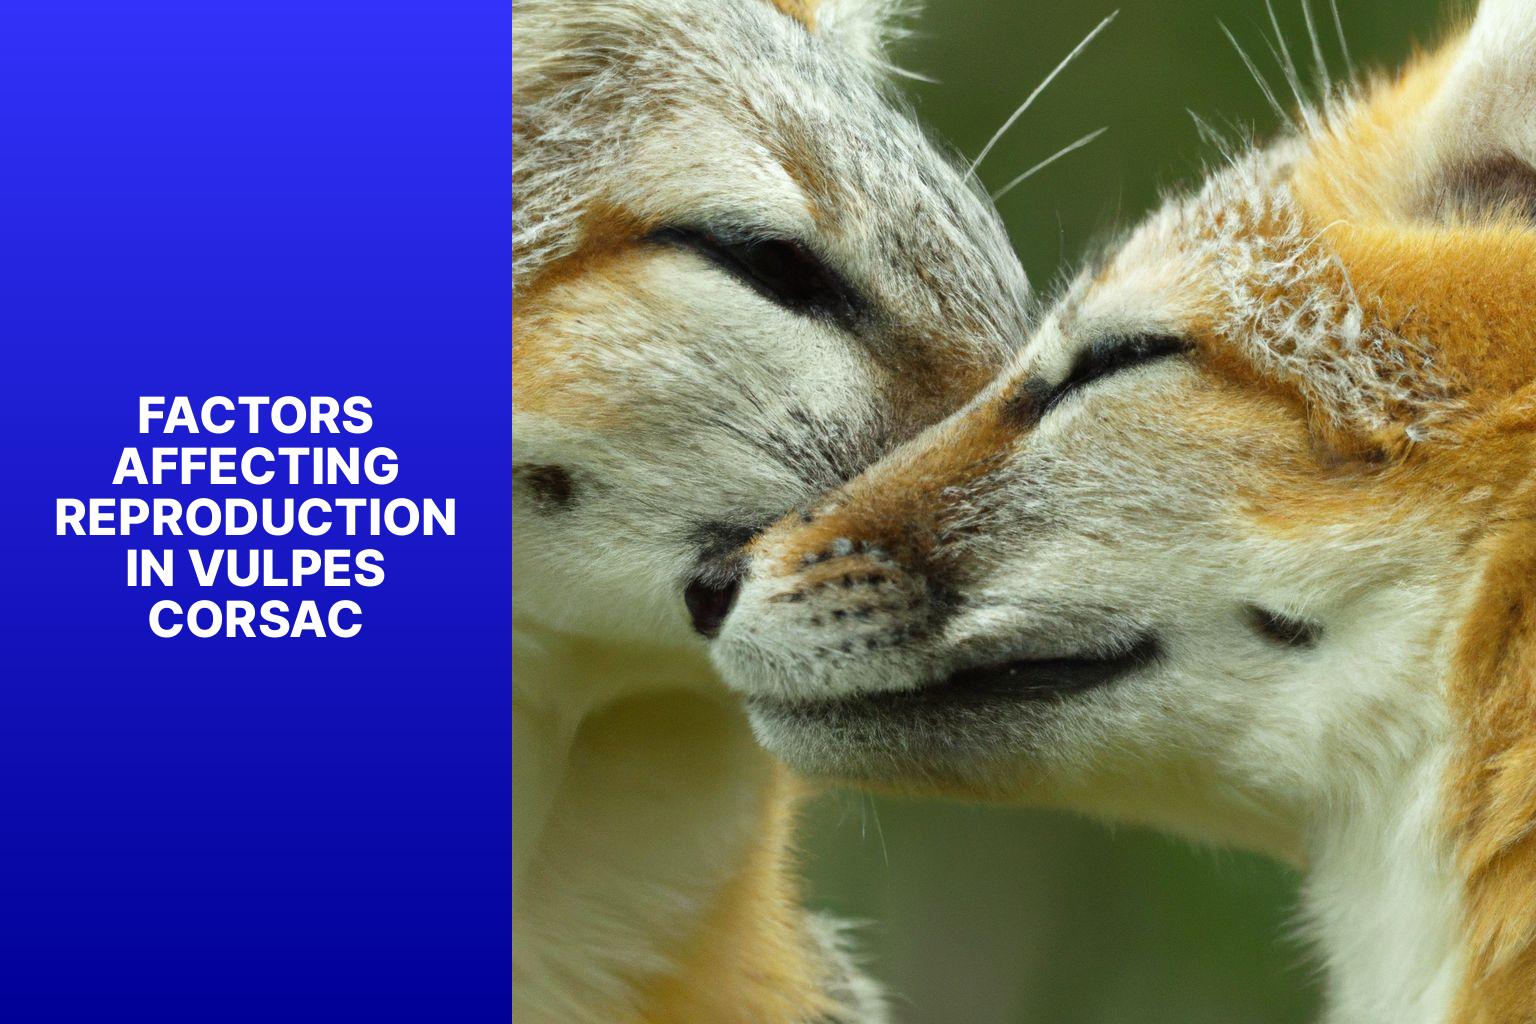 Factors Affecting Reproduction in Vulpes Corsac - Vulpes Corsac Reproduction 